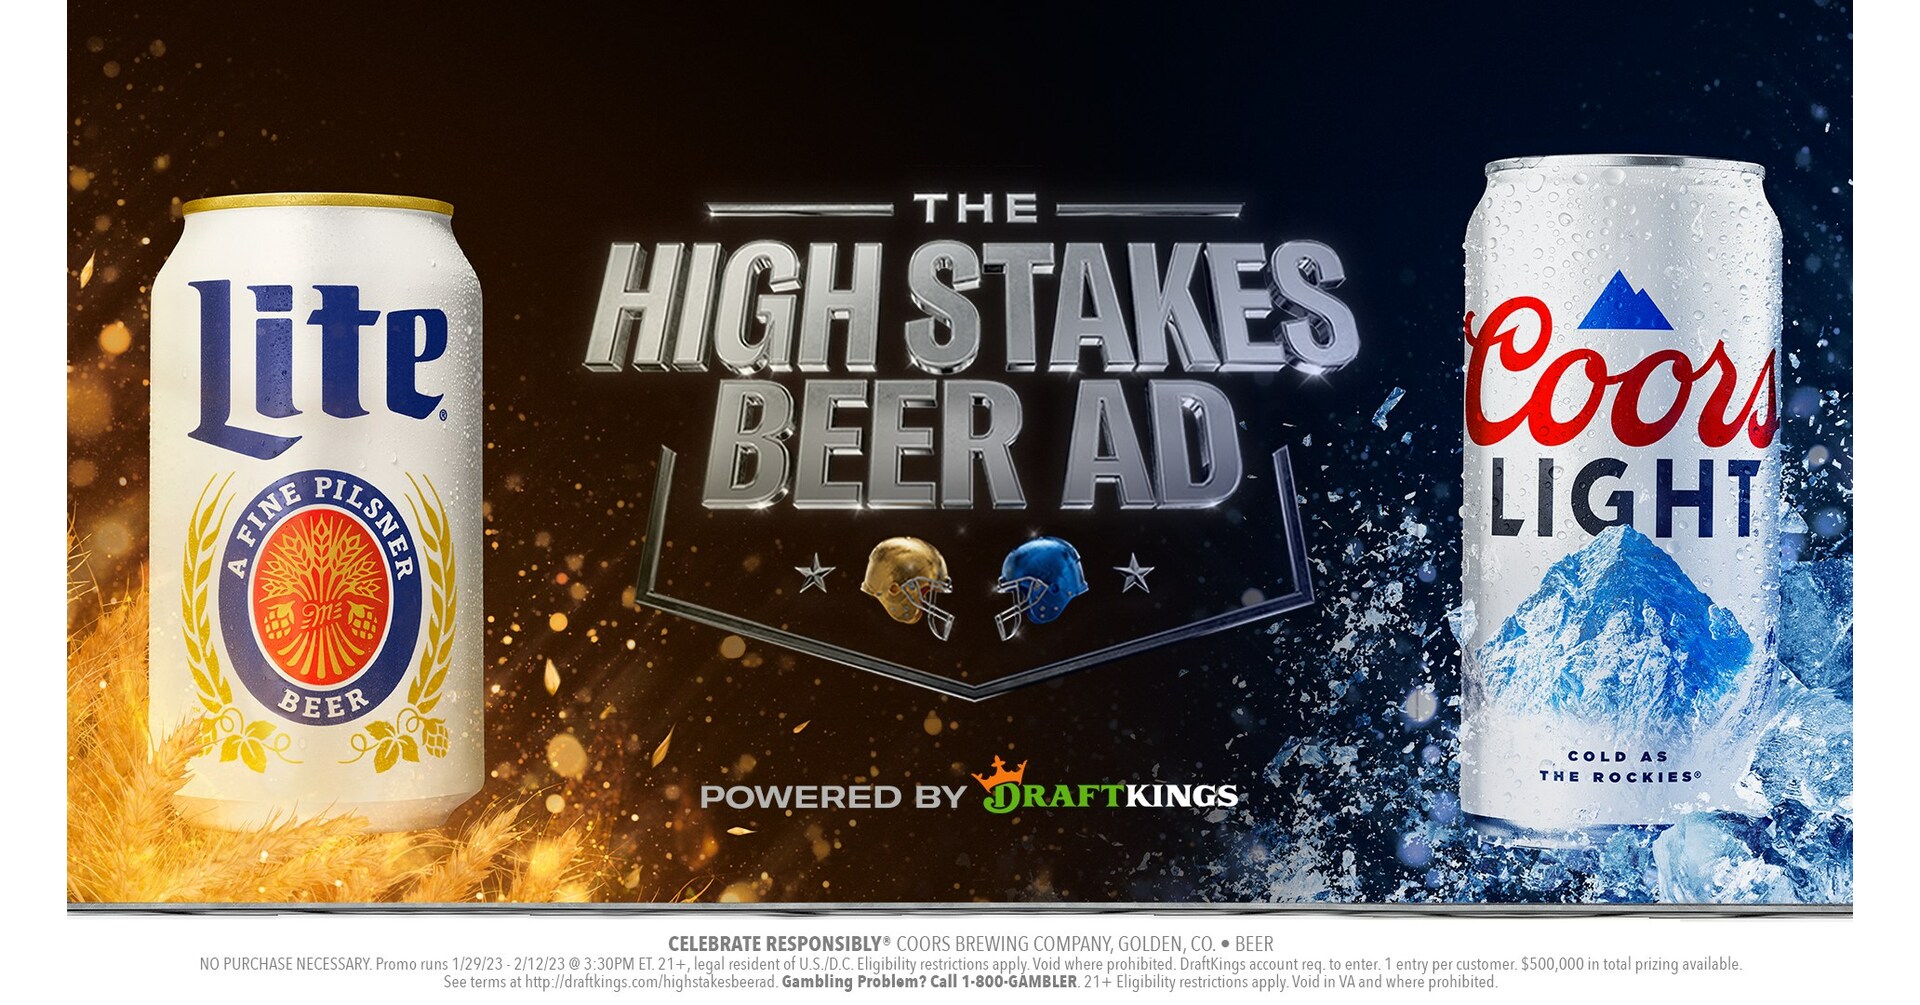 https://mma.prnewswire.com/media/1991463/Molson_Coors_High_Stakes_Beer_Ad.jpg?p=facebook